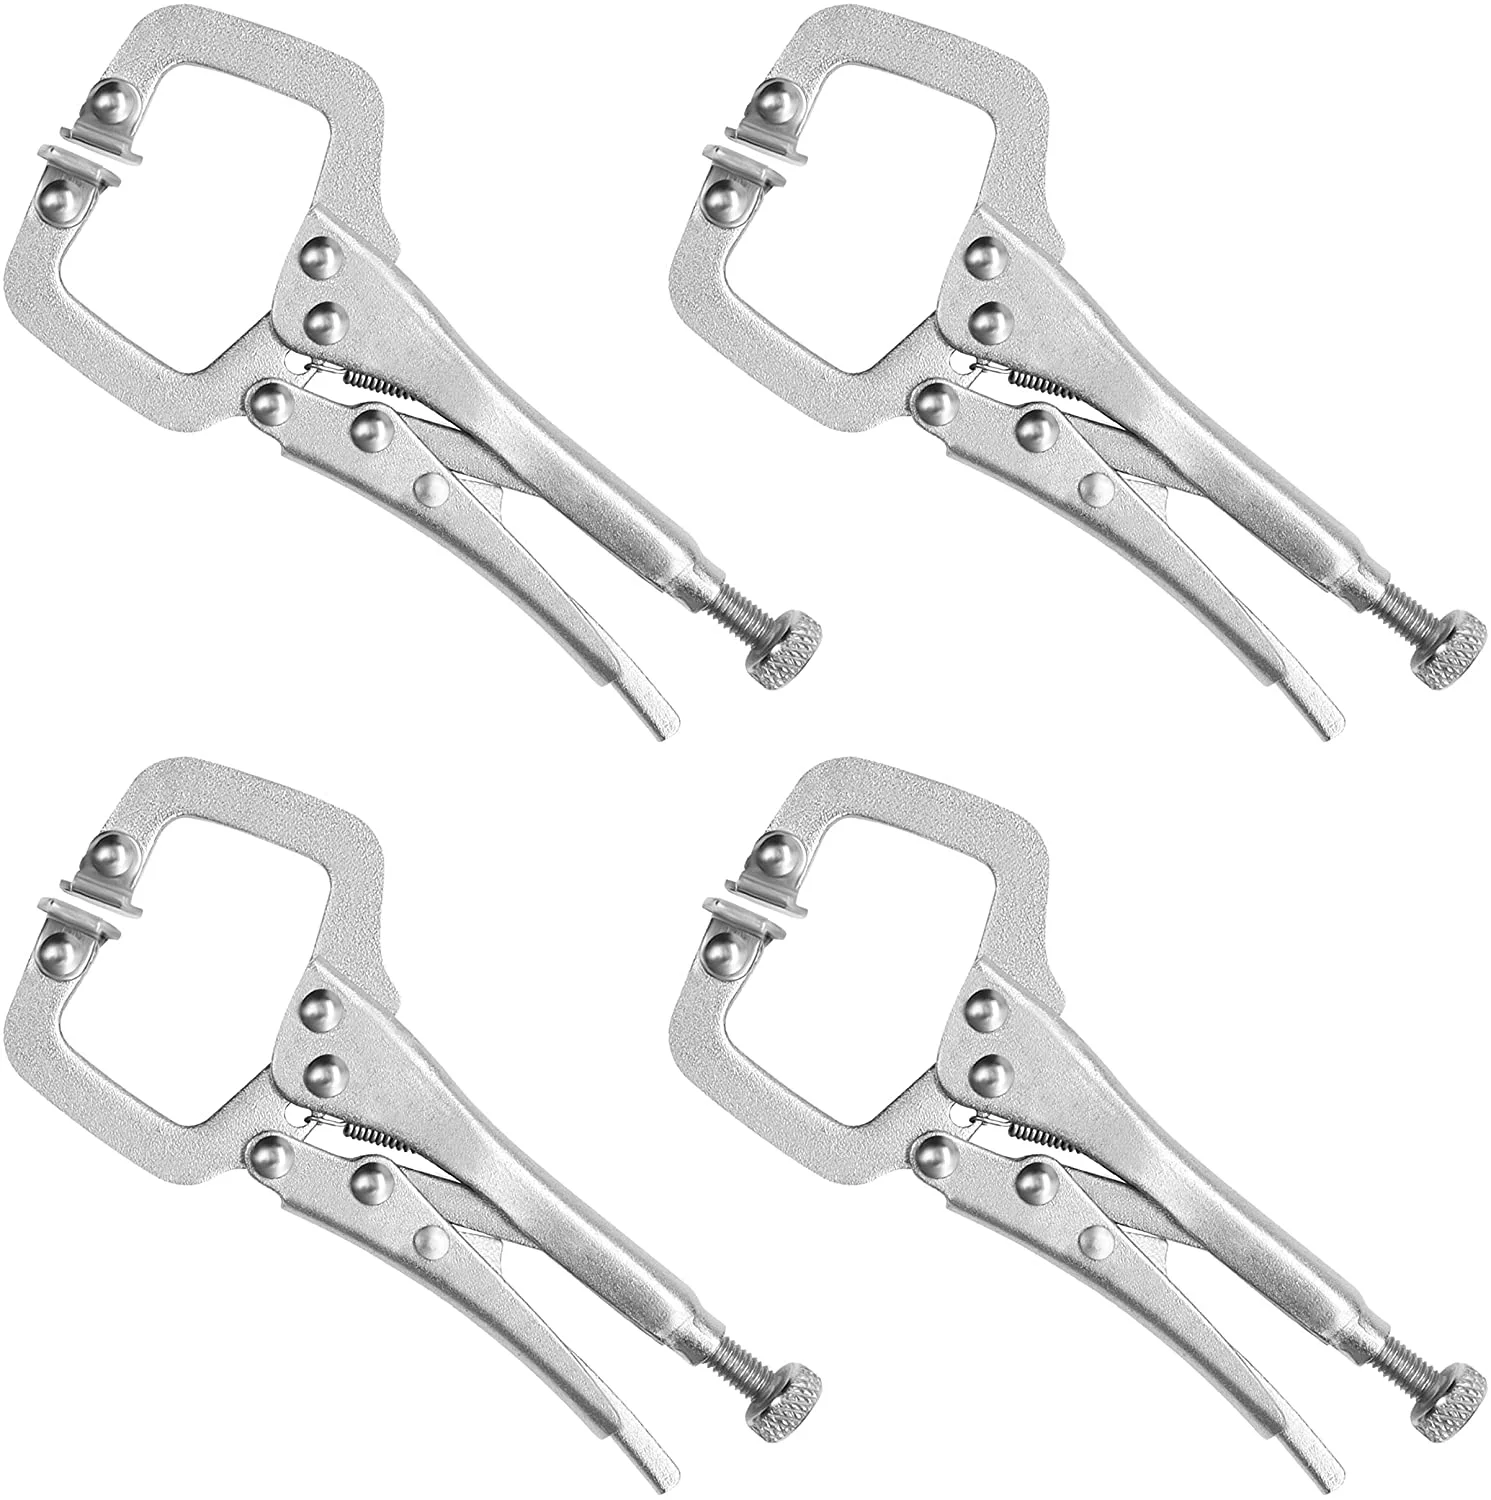 Metal grip locking c clamp pliers with adjustable screw and swivel pads (4 pack) - mini easy and quick release welding pliers for uneven surfaces, angles, crafts & hobbies 